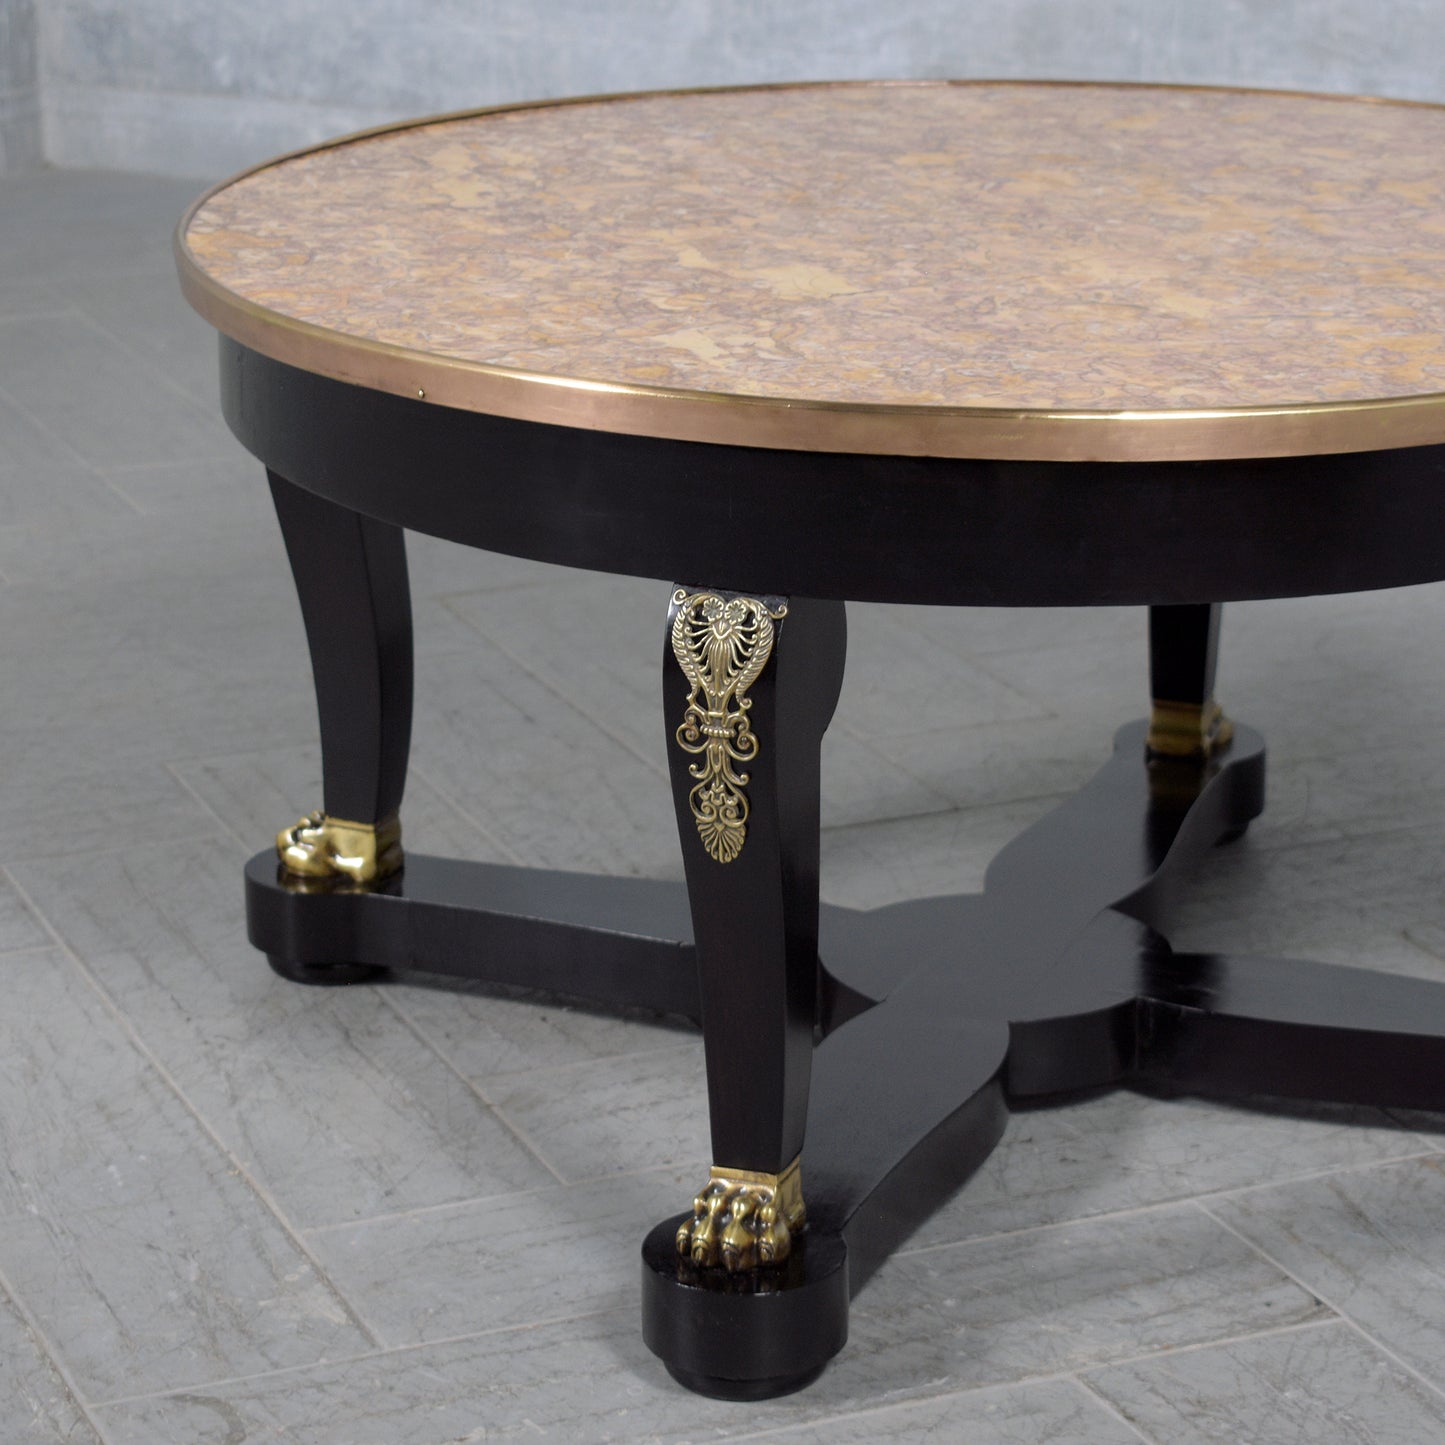 1880s Empire Style Antique Coffee Table with Marble Top & Brass Accents